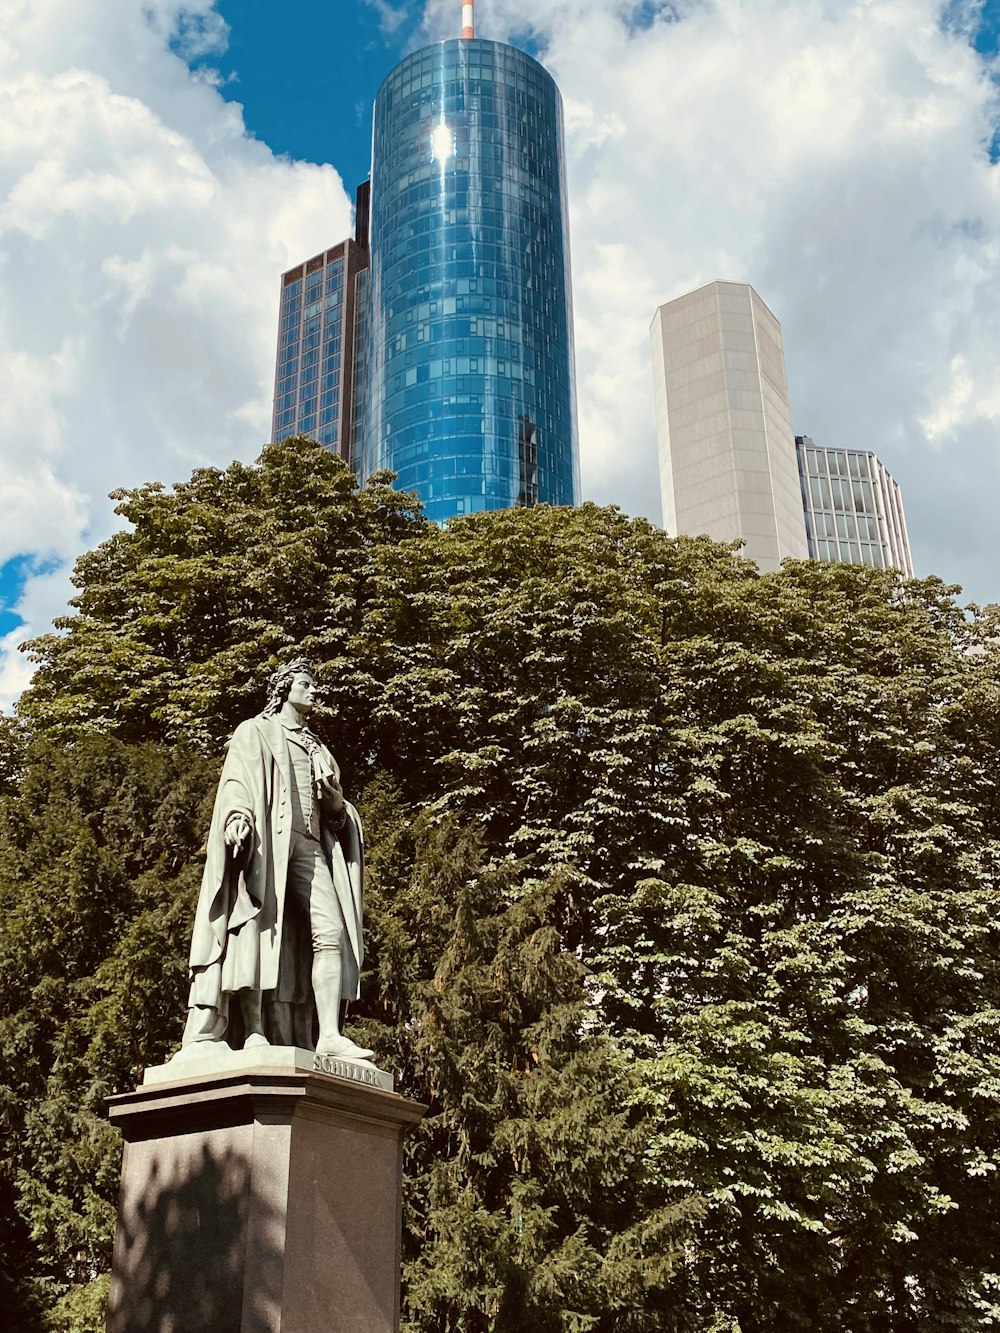 a statue of a man in front of a tall building